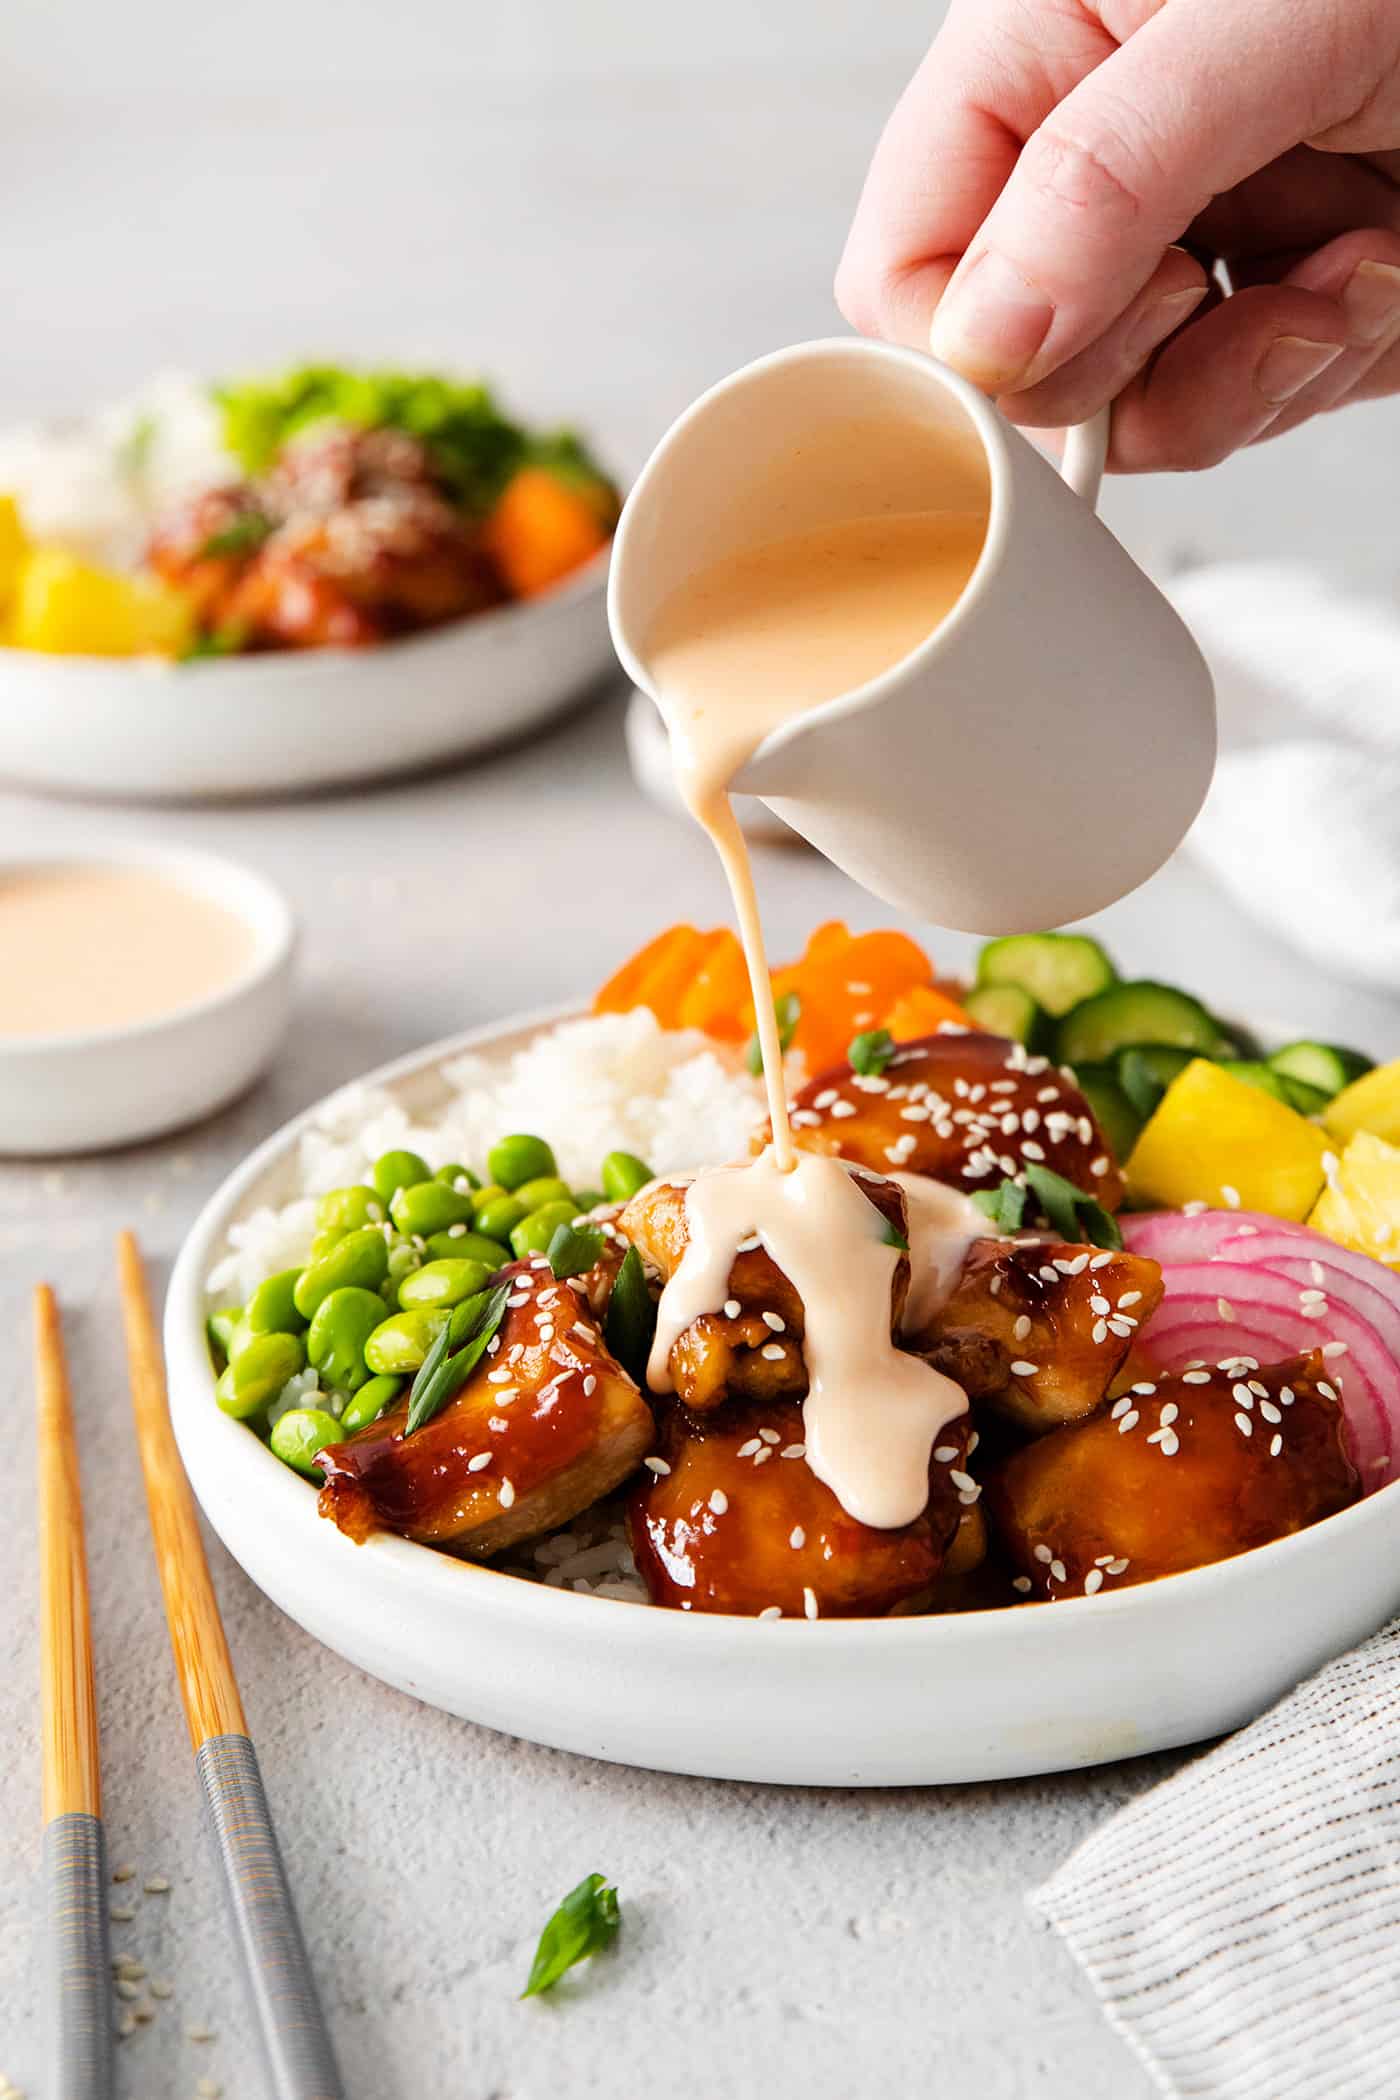 Spicy mayo vinaigrette being poured over a teriyaki chicken poke bowl